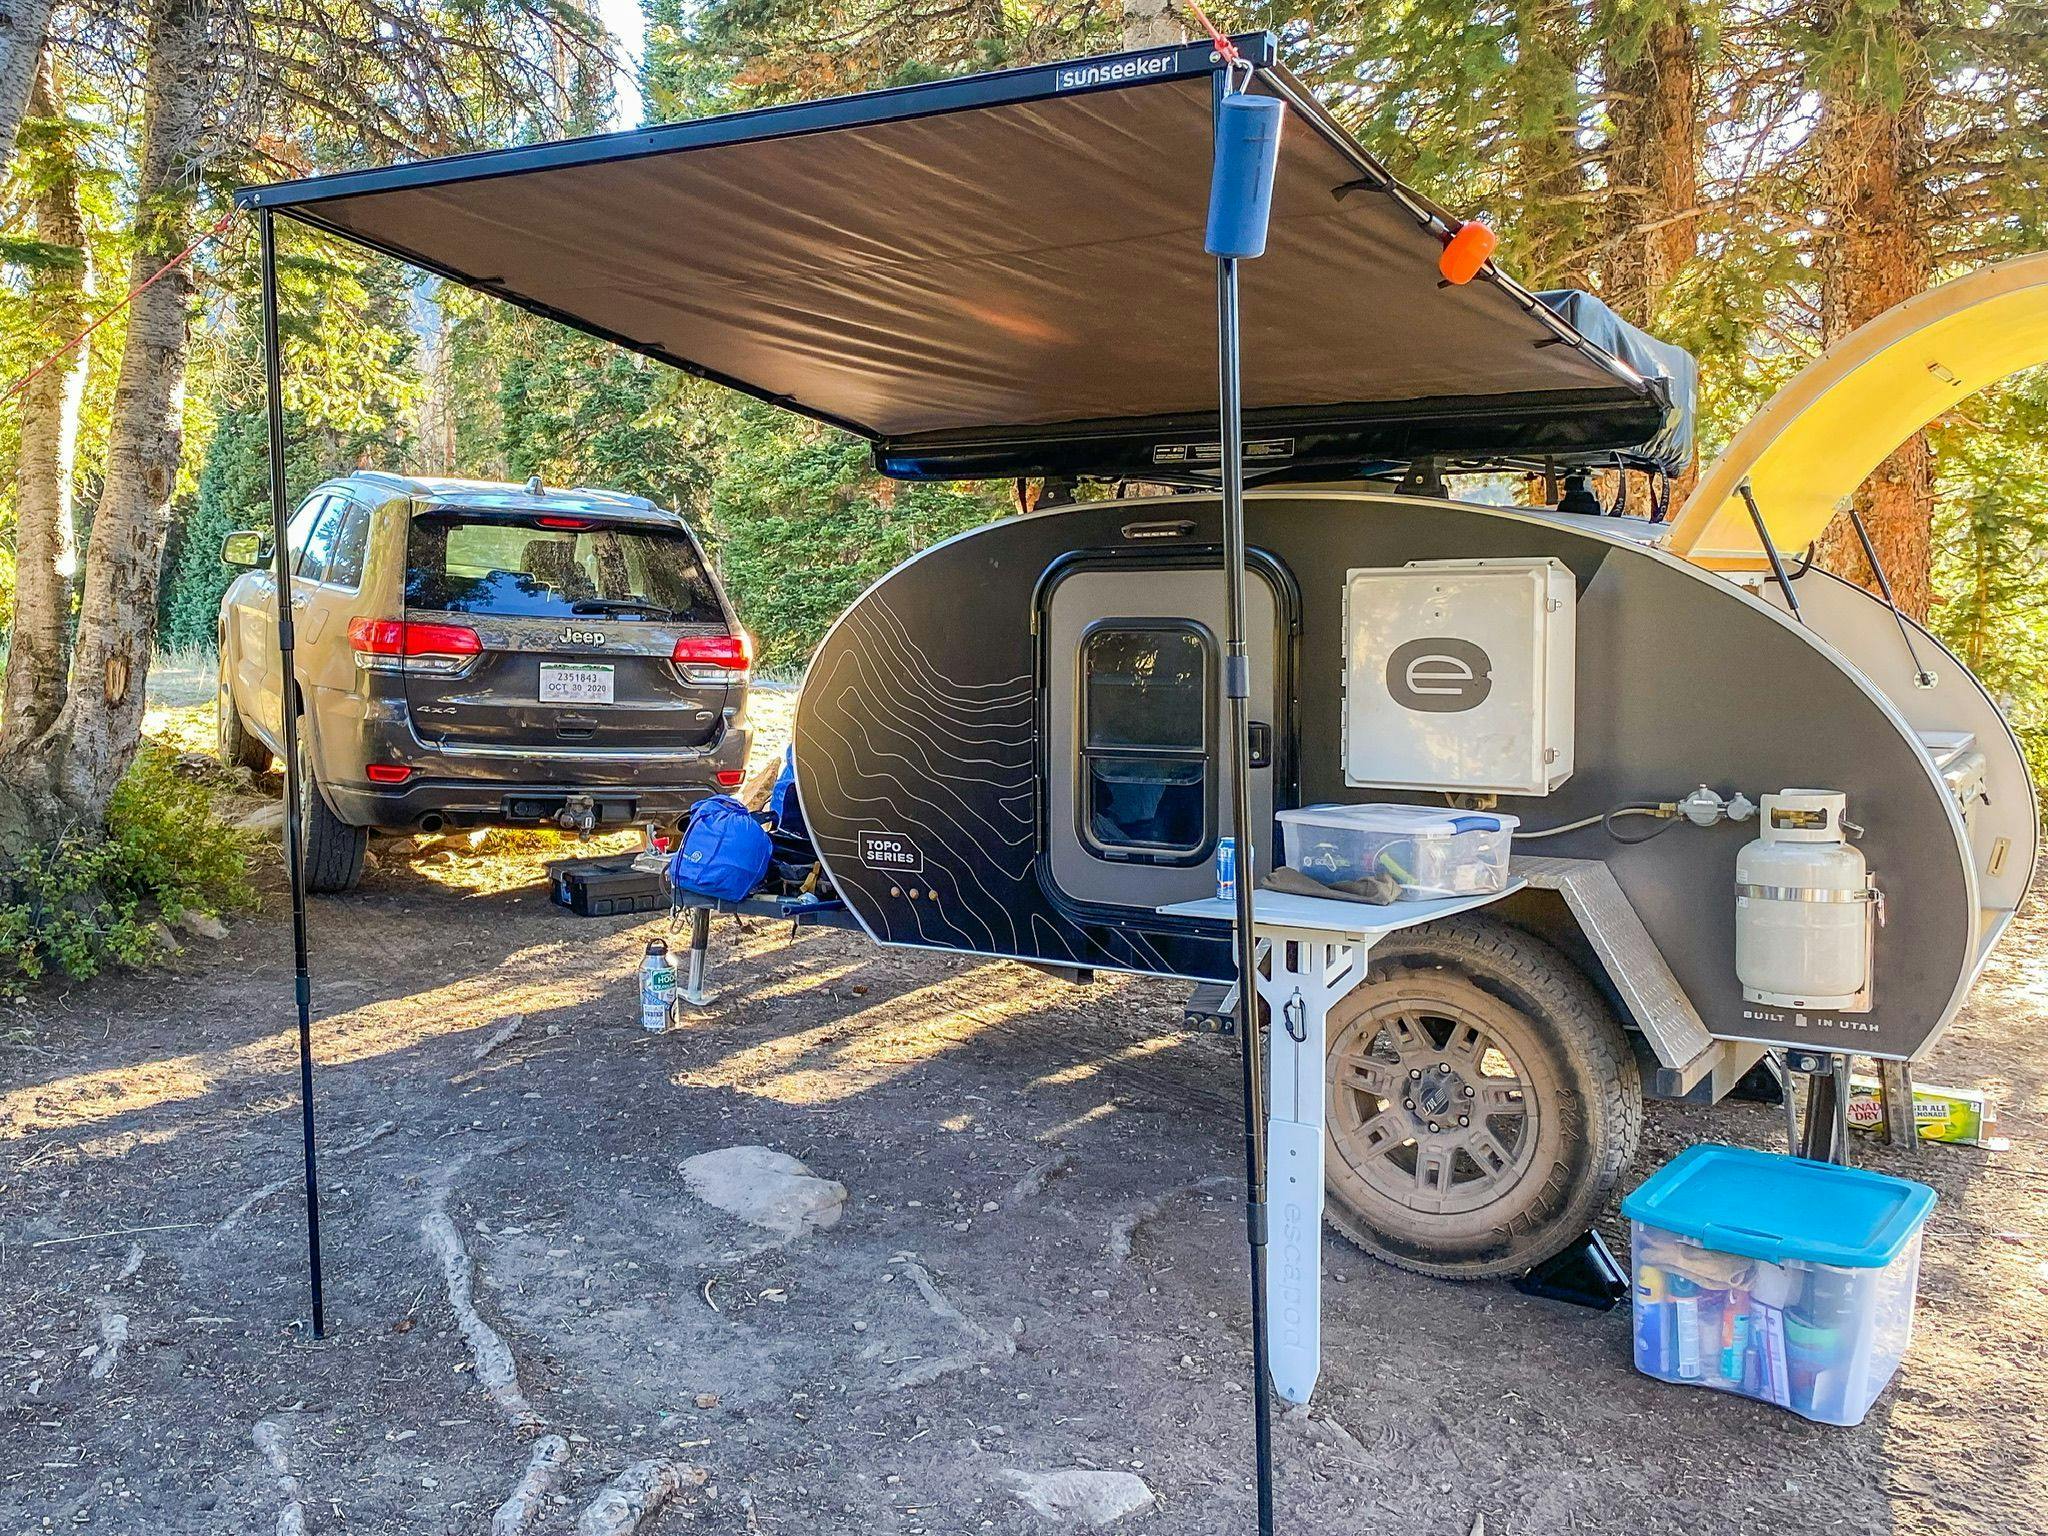 An Escapod teardrop trailer is set up at a camp in Whitney Reservoir. The awning is extended and the hatch is open.